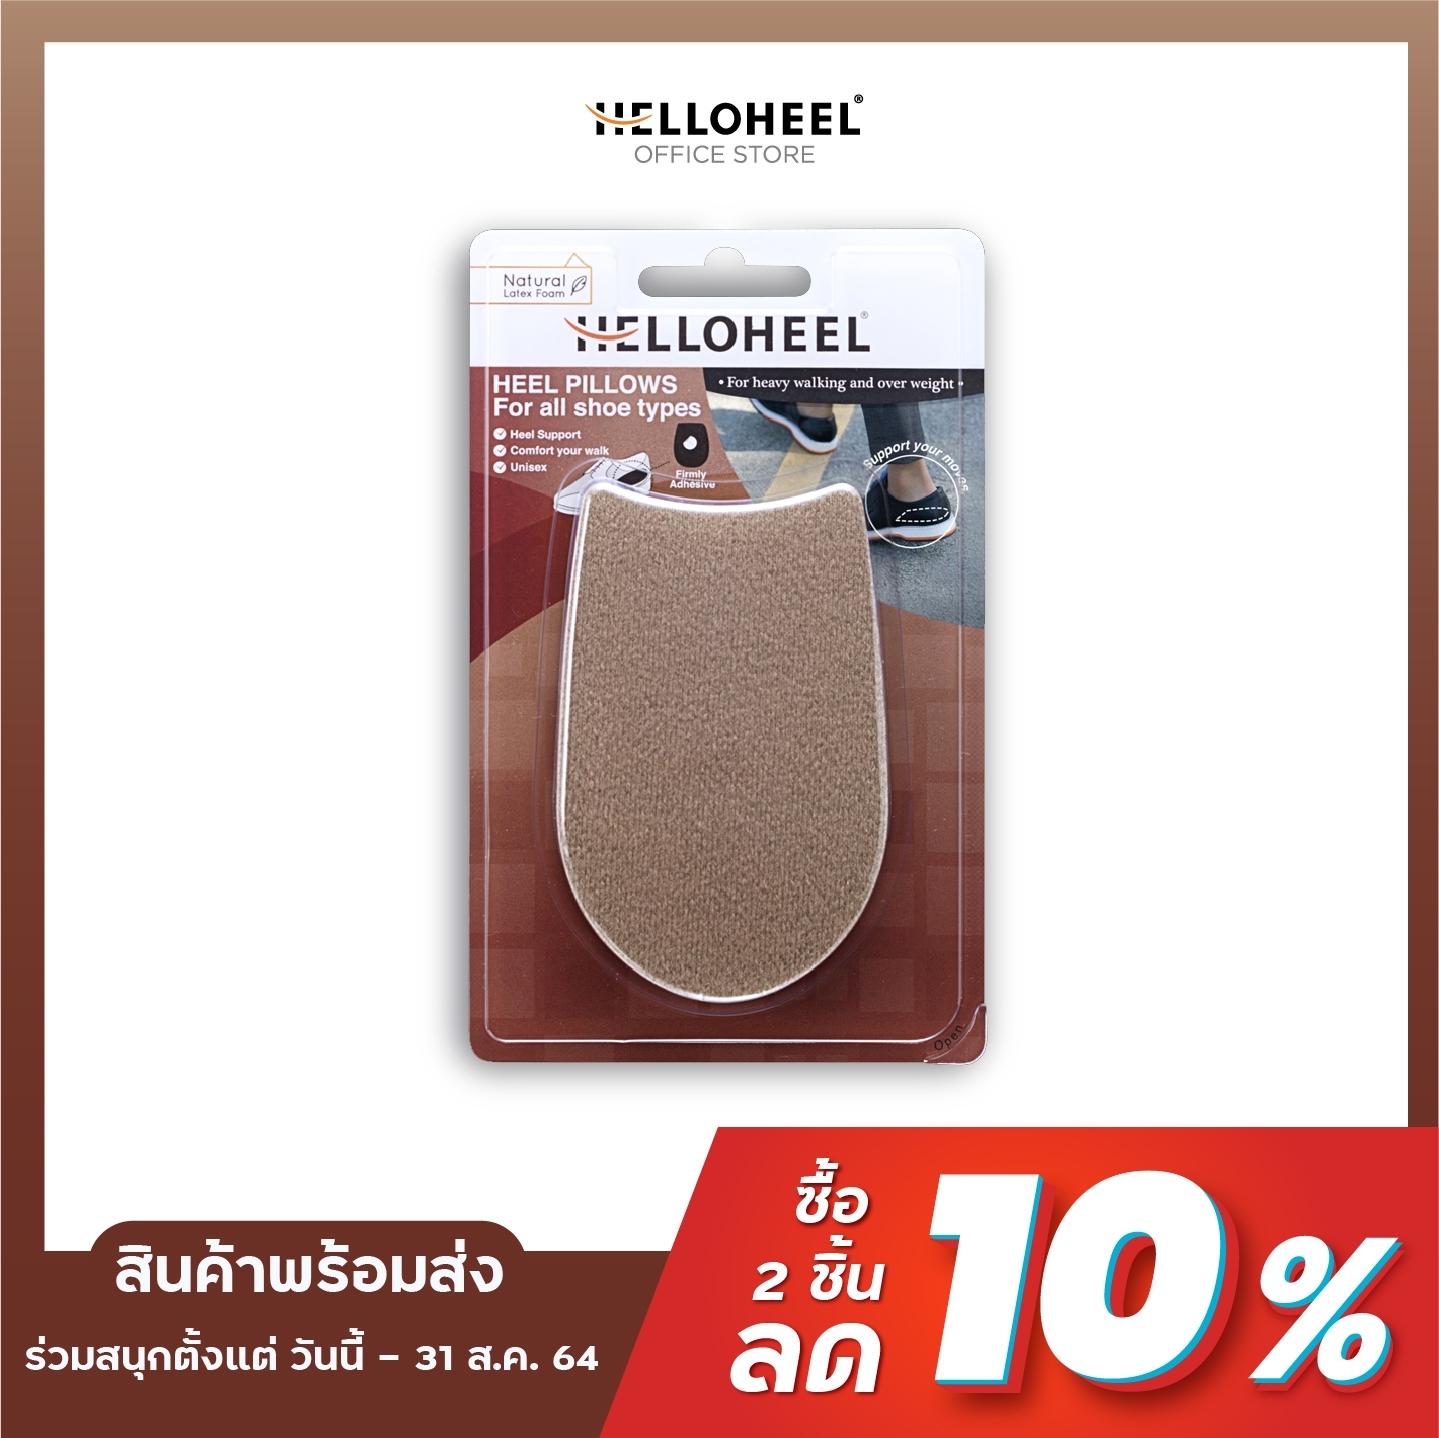 Helloheel หมอนรองส้นเท้า สำหรับผู้ที่เดินมากหรือผู้ที่มีน้ำหนักเกิน Heel Pillows 1 คู่ / Heel Cushion Pads for Heavy Walkers | Made with High Resilience Natural Rubber 1 Pair